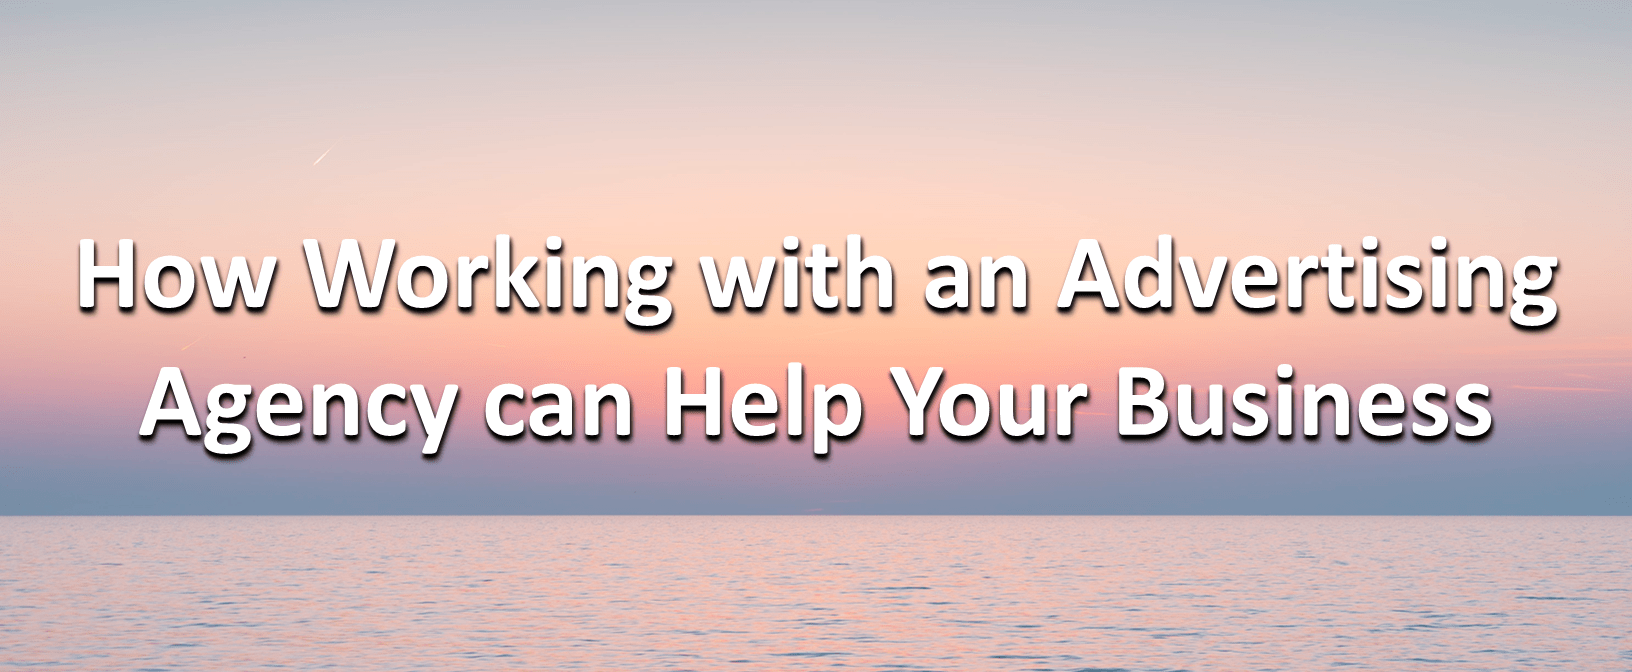 How working with an advertising agency can help your business